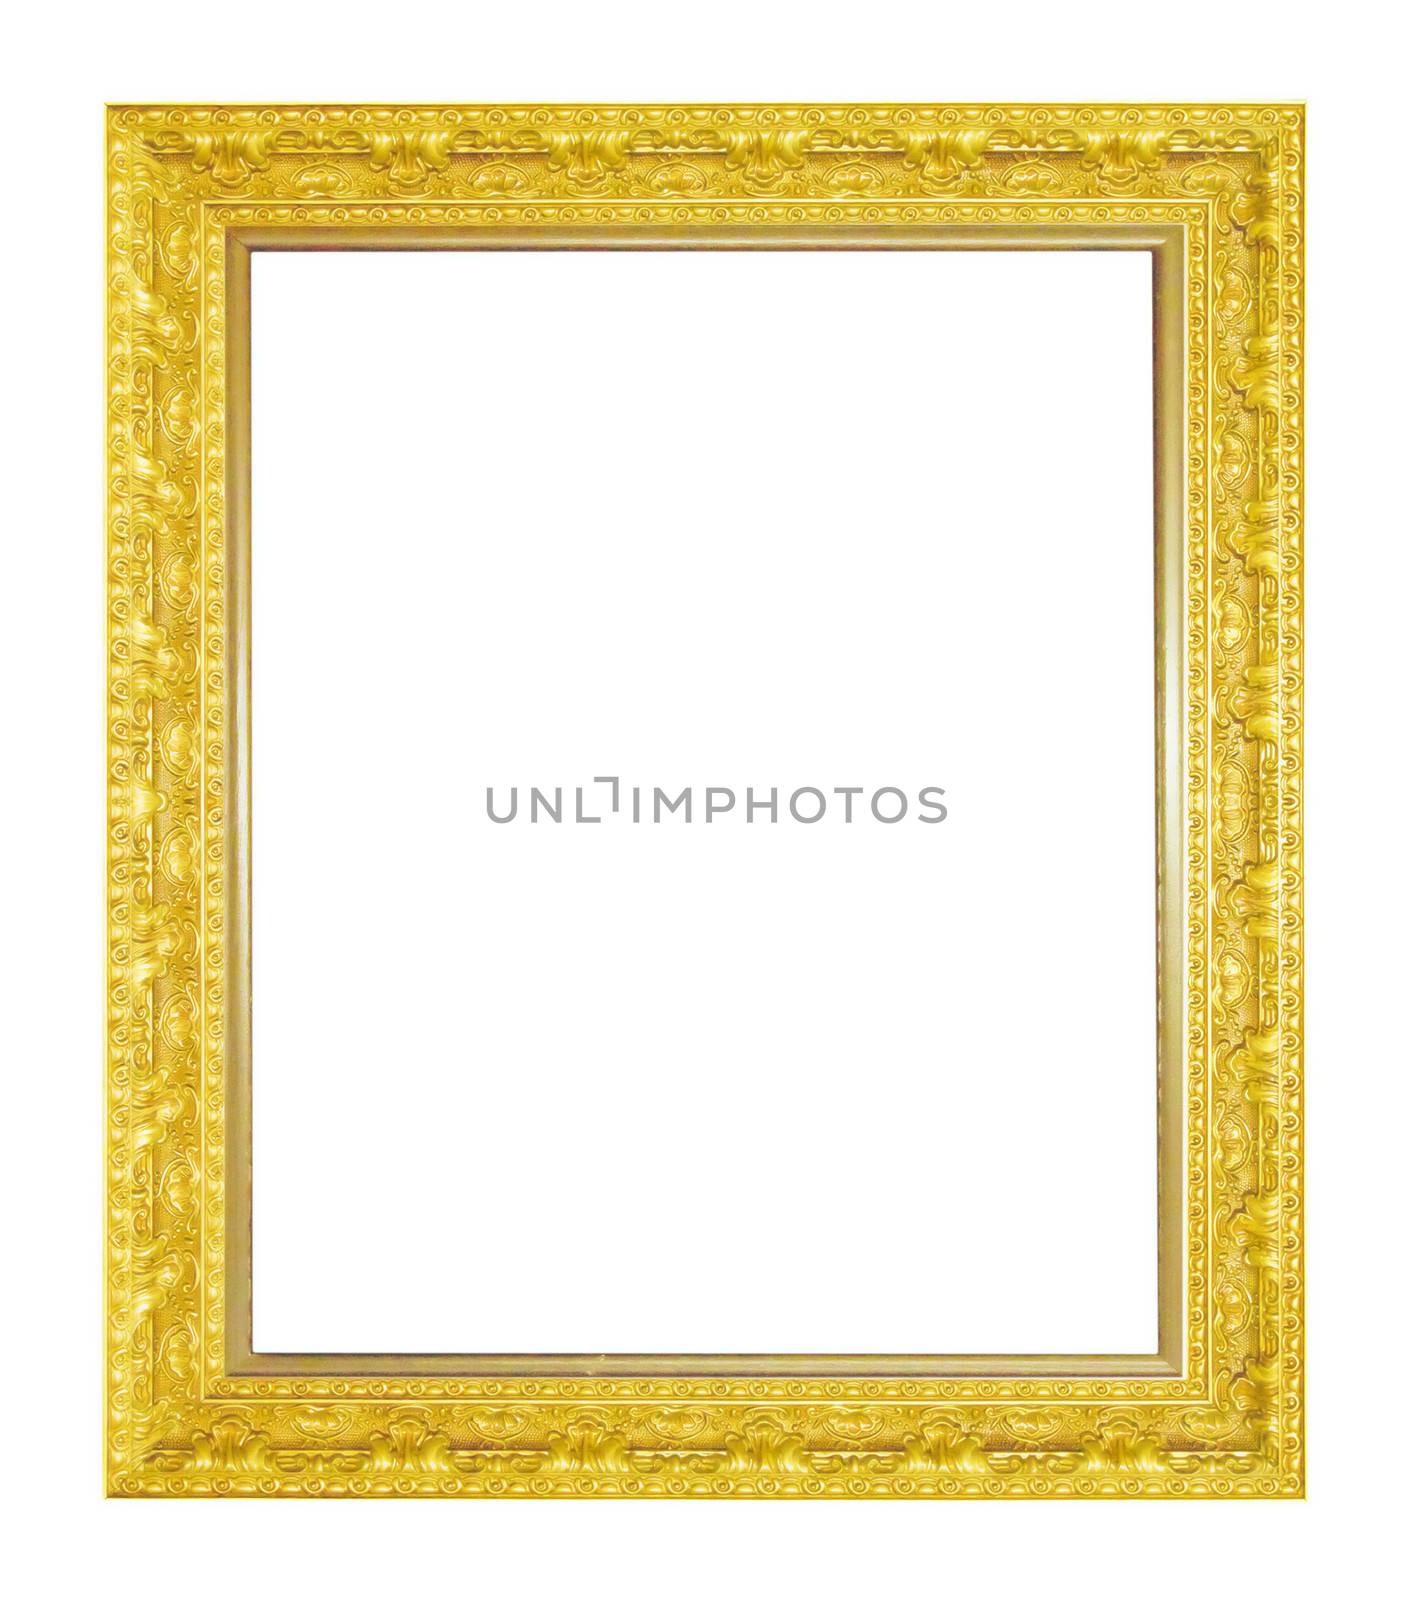 Ancient wooden frame isolated on white background.